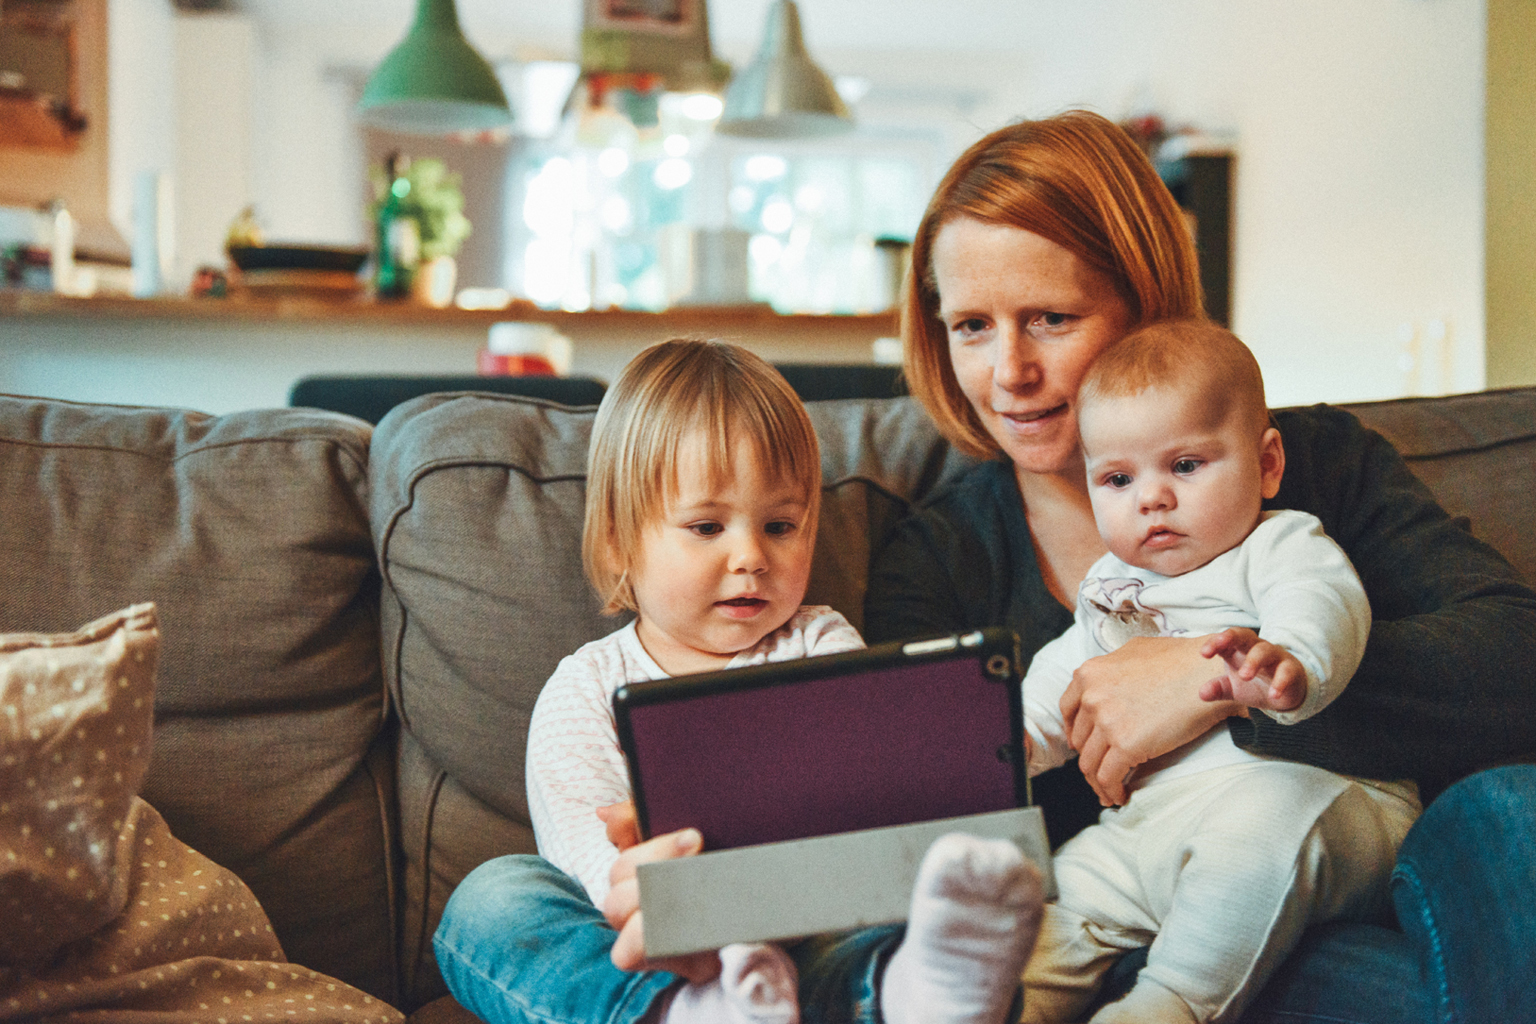 Woman sitting on couch with two young children, all watching tablet